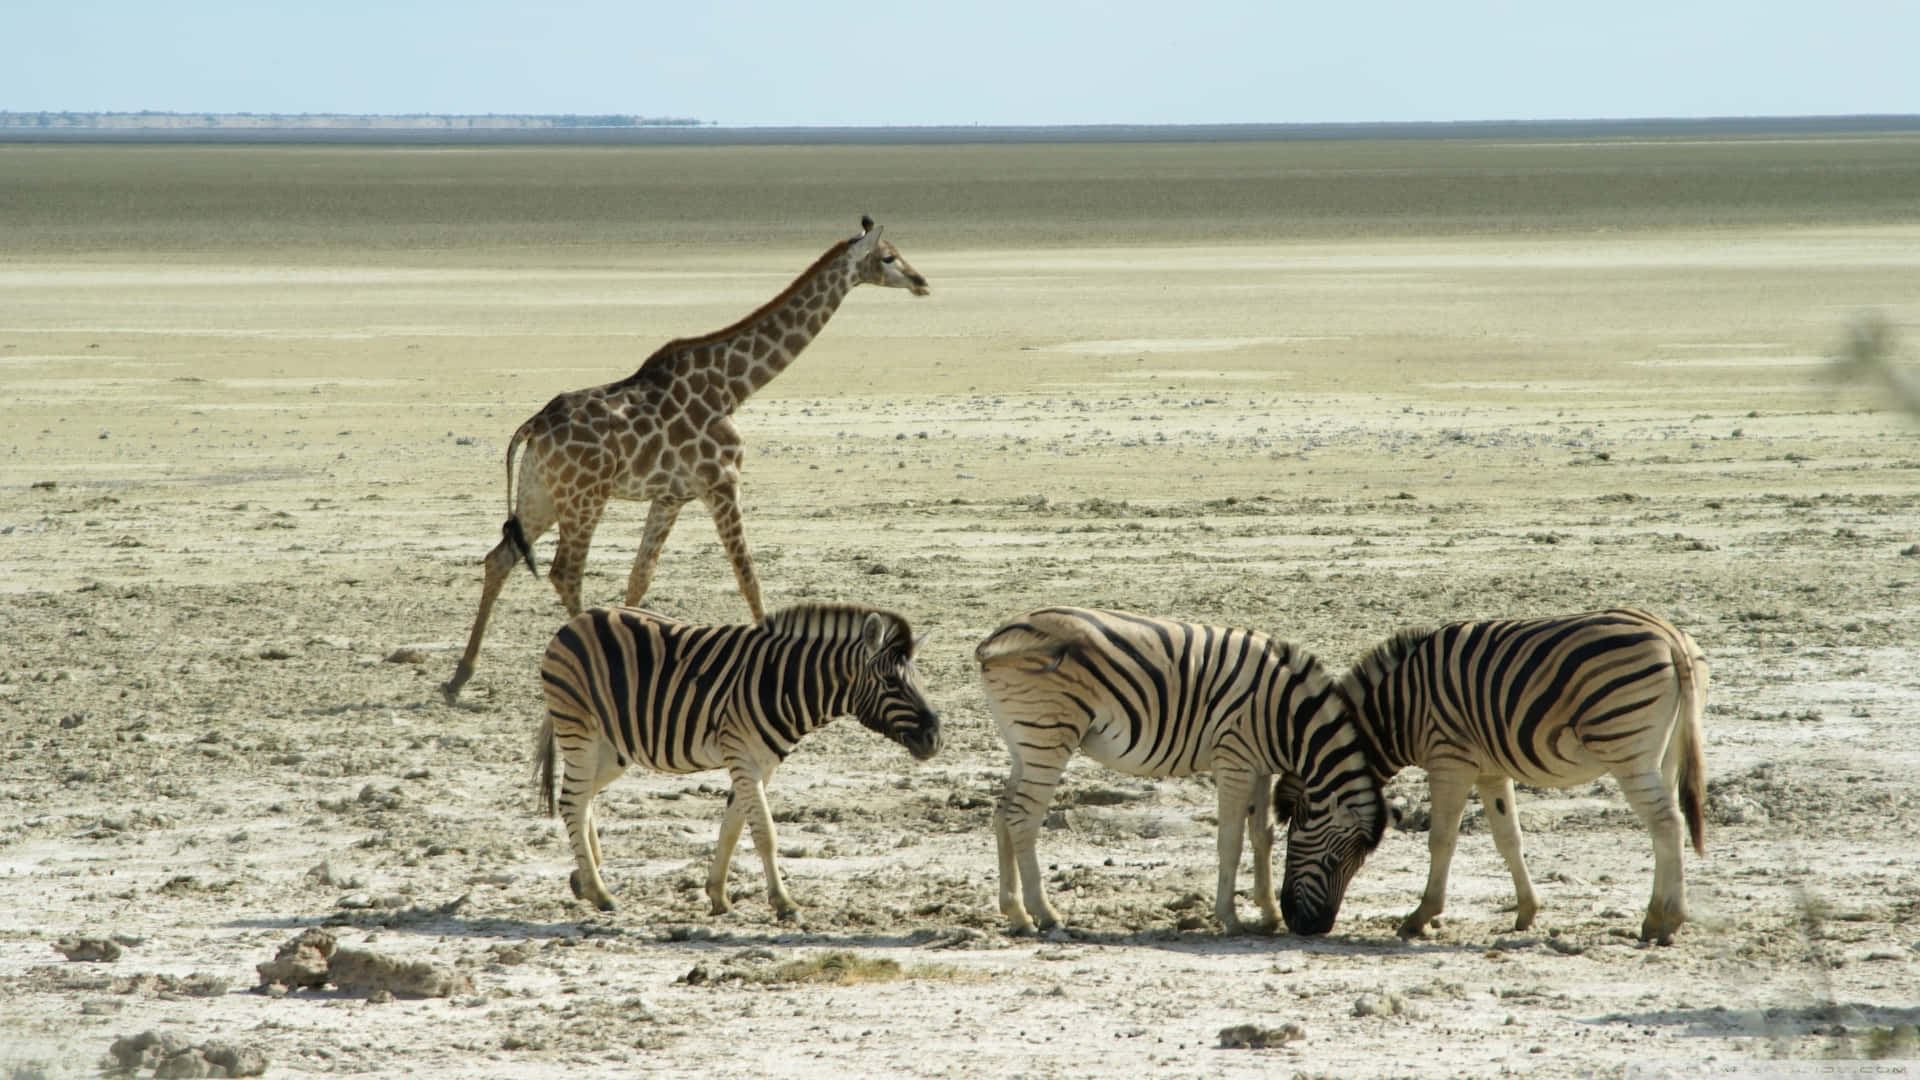 Get up close and personal with African wildlife Wallpaper